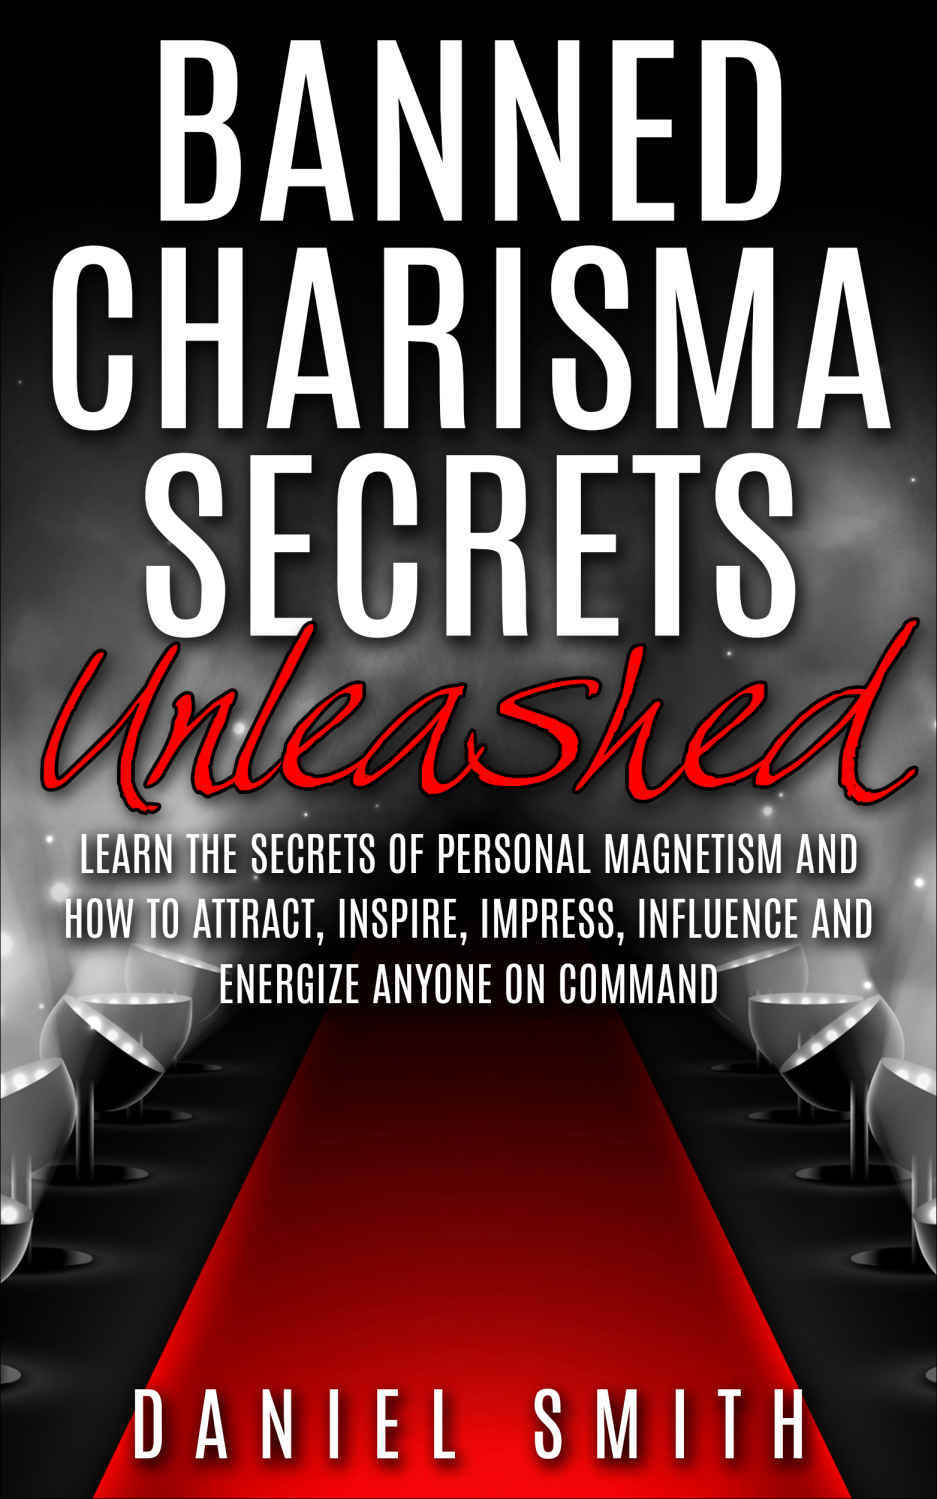 Banned Charisma Secrets Unleashed: Learn the Secrets of Personal Magnetism and How to Attract, Inspire, Impress, Influence and Energize Anyone on Command